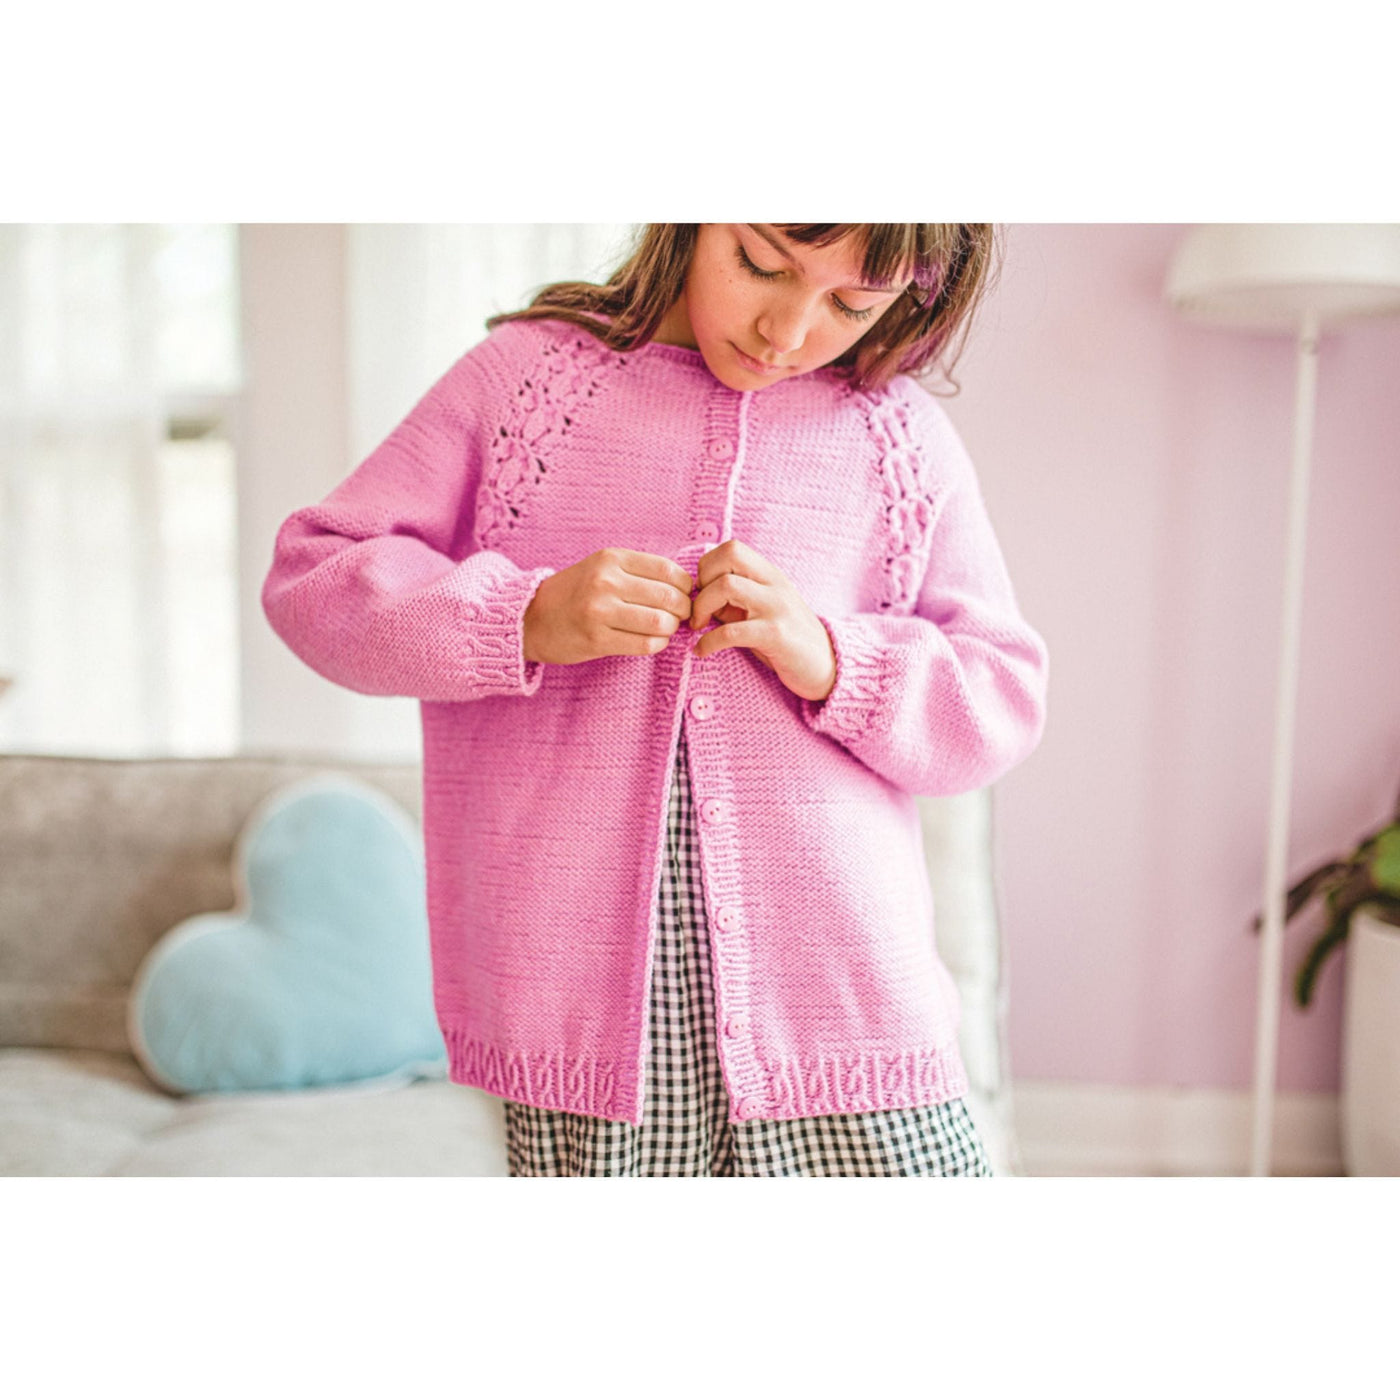 Child wearing pink cardigan looking down while buttoning the front.  Cardigan is a design from Mini Pom Magazine. 